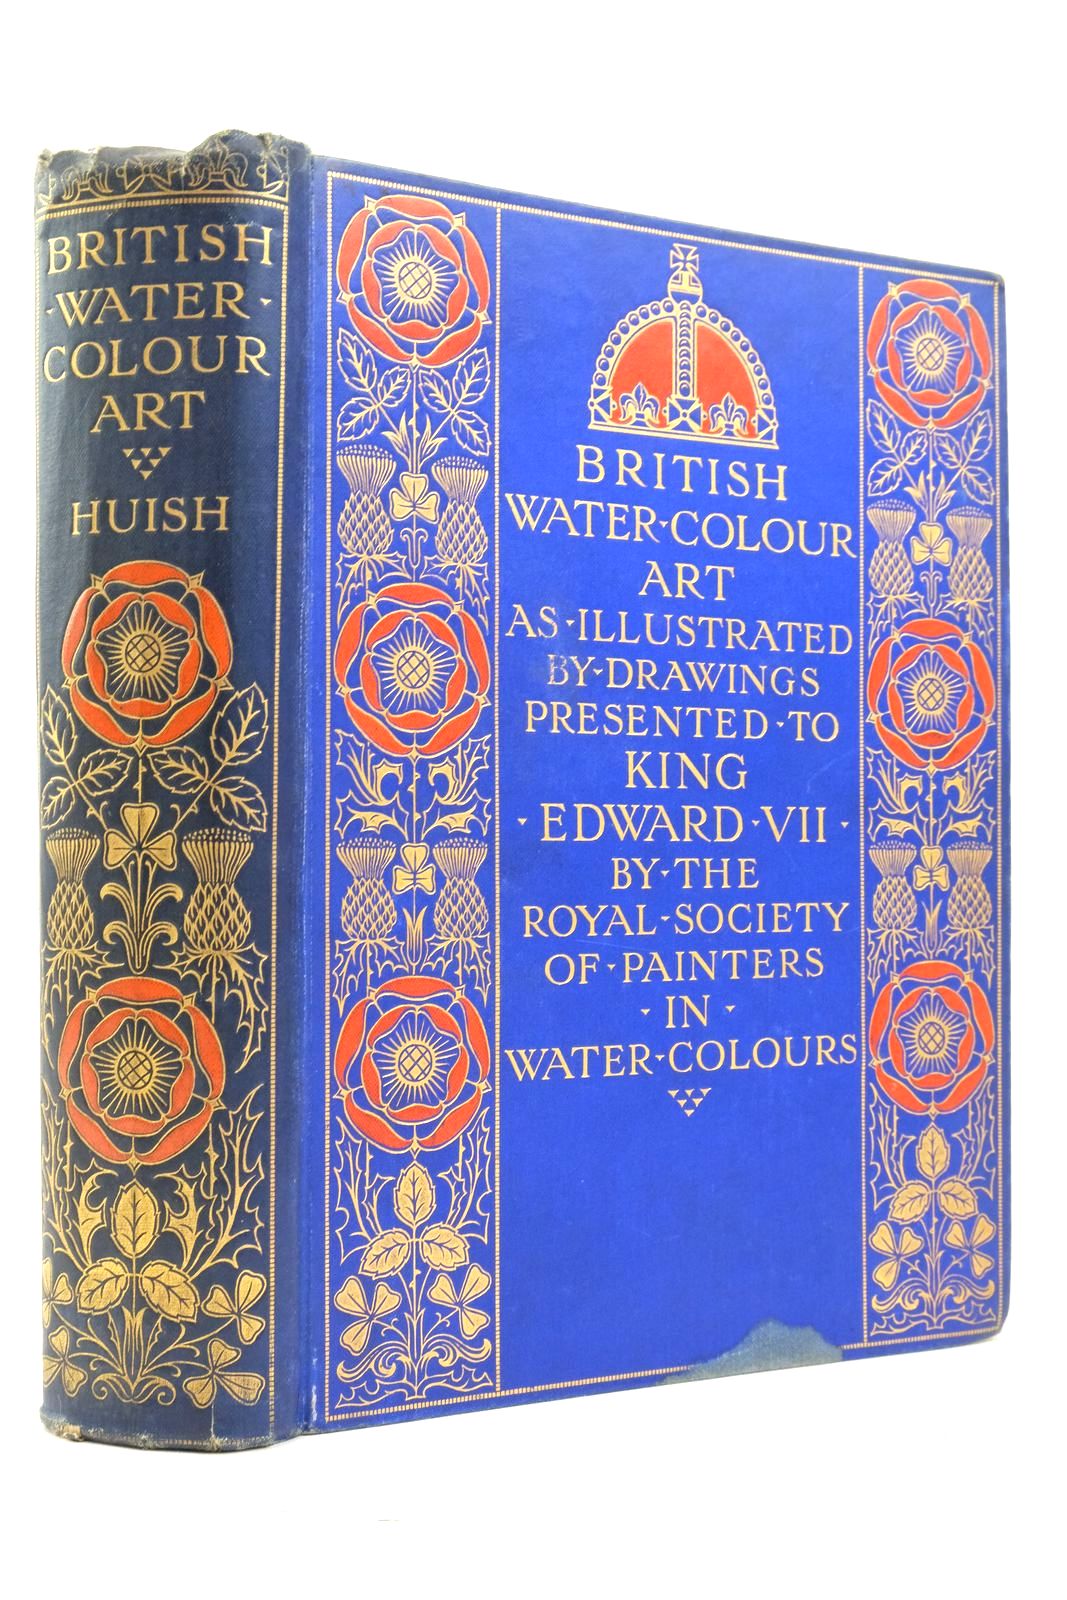 Photo of BRITISH WATER-COLOUR ART written by Huish, Marcus B. published by Adam & Charles Black, The Fine Art Society Ltd. (STOCK CODE: 2137534)  for sale by Stella & Rose's Books